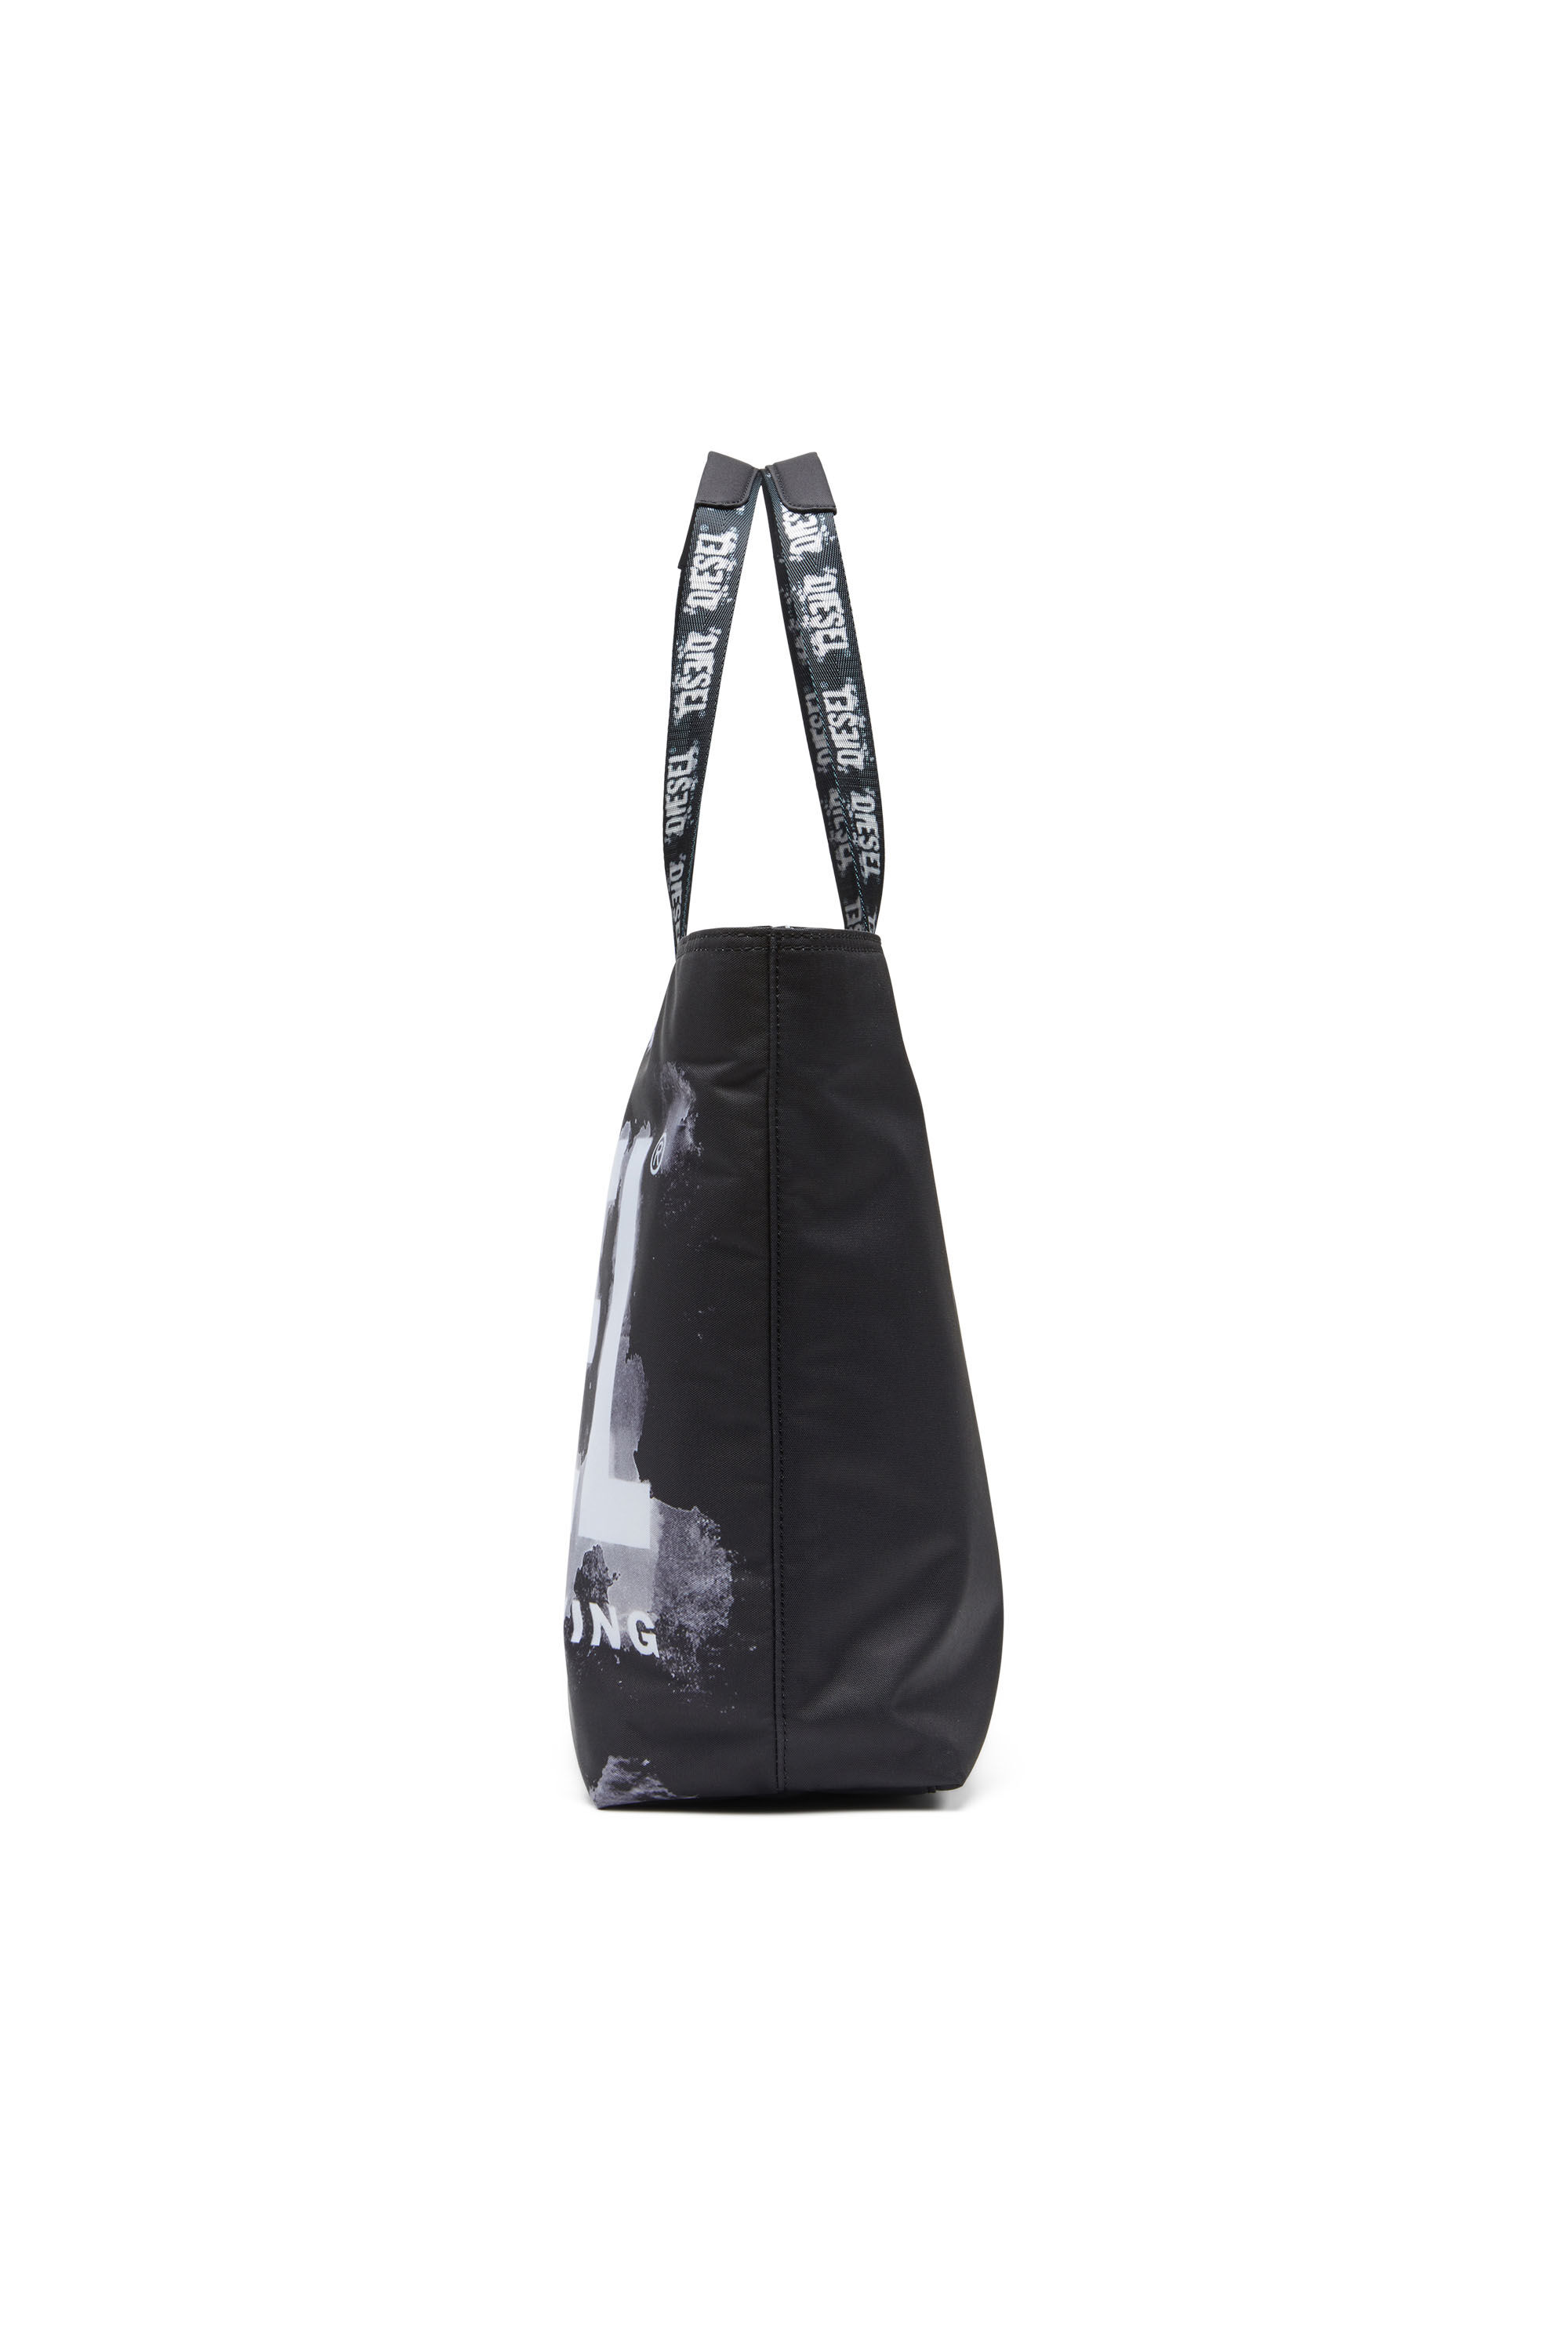 RAVE TOTE NS X Rave Tote Ns X - Tote bag with bleeding logo print 